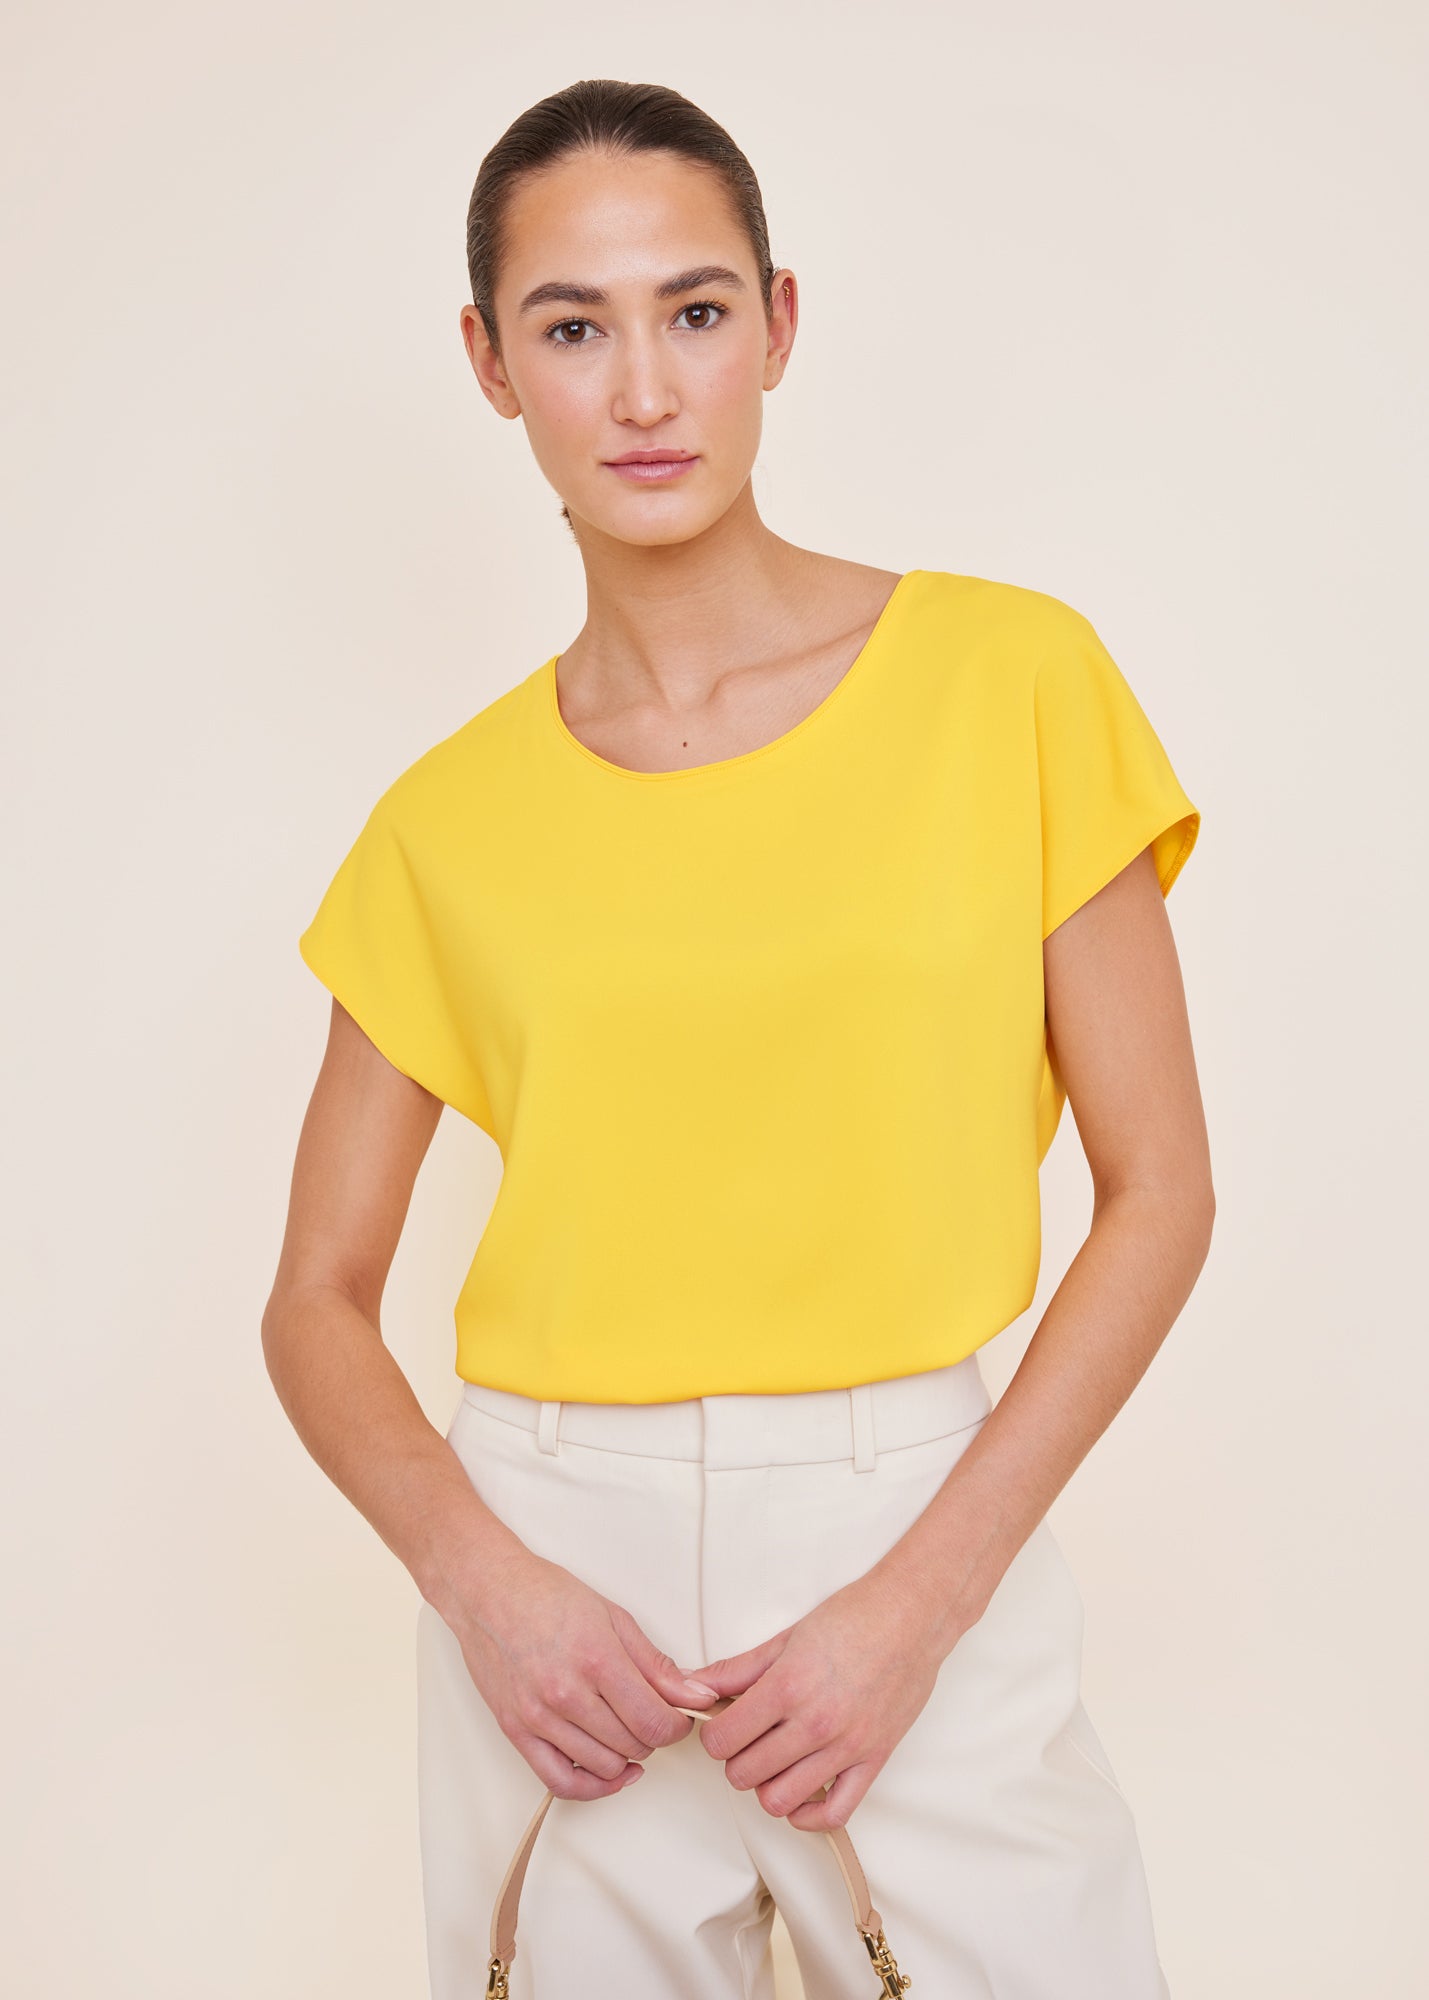 Crepe top with side slits